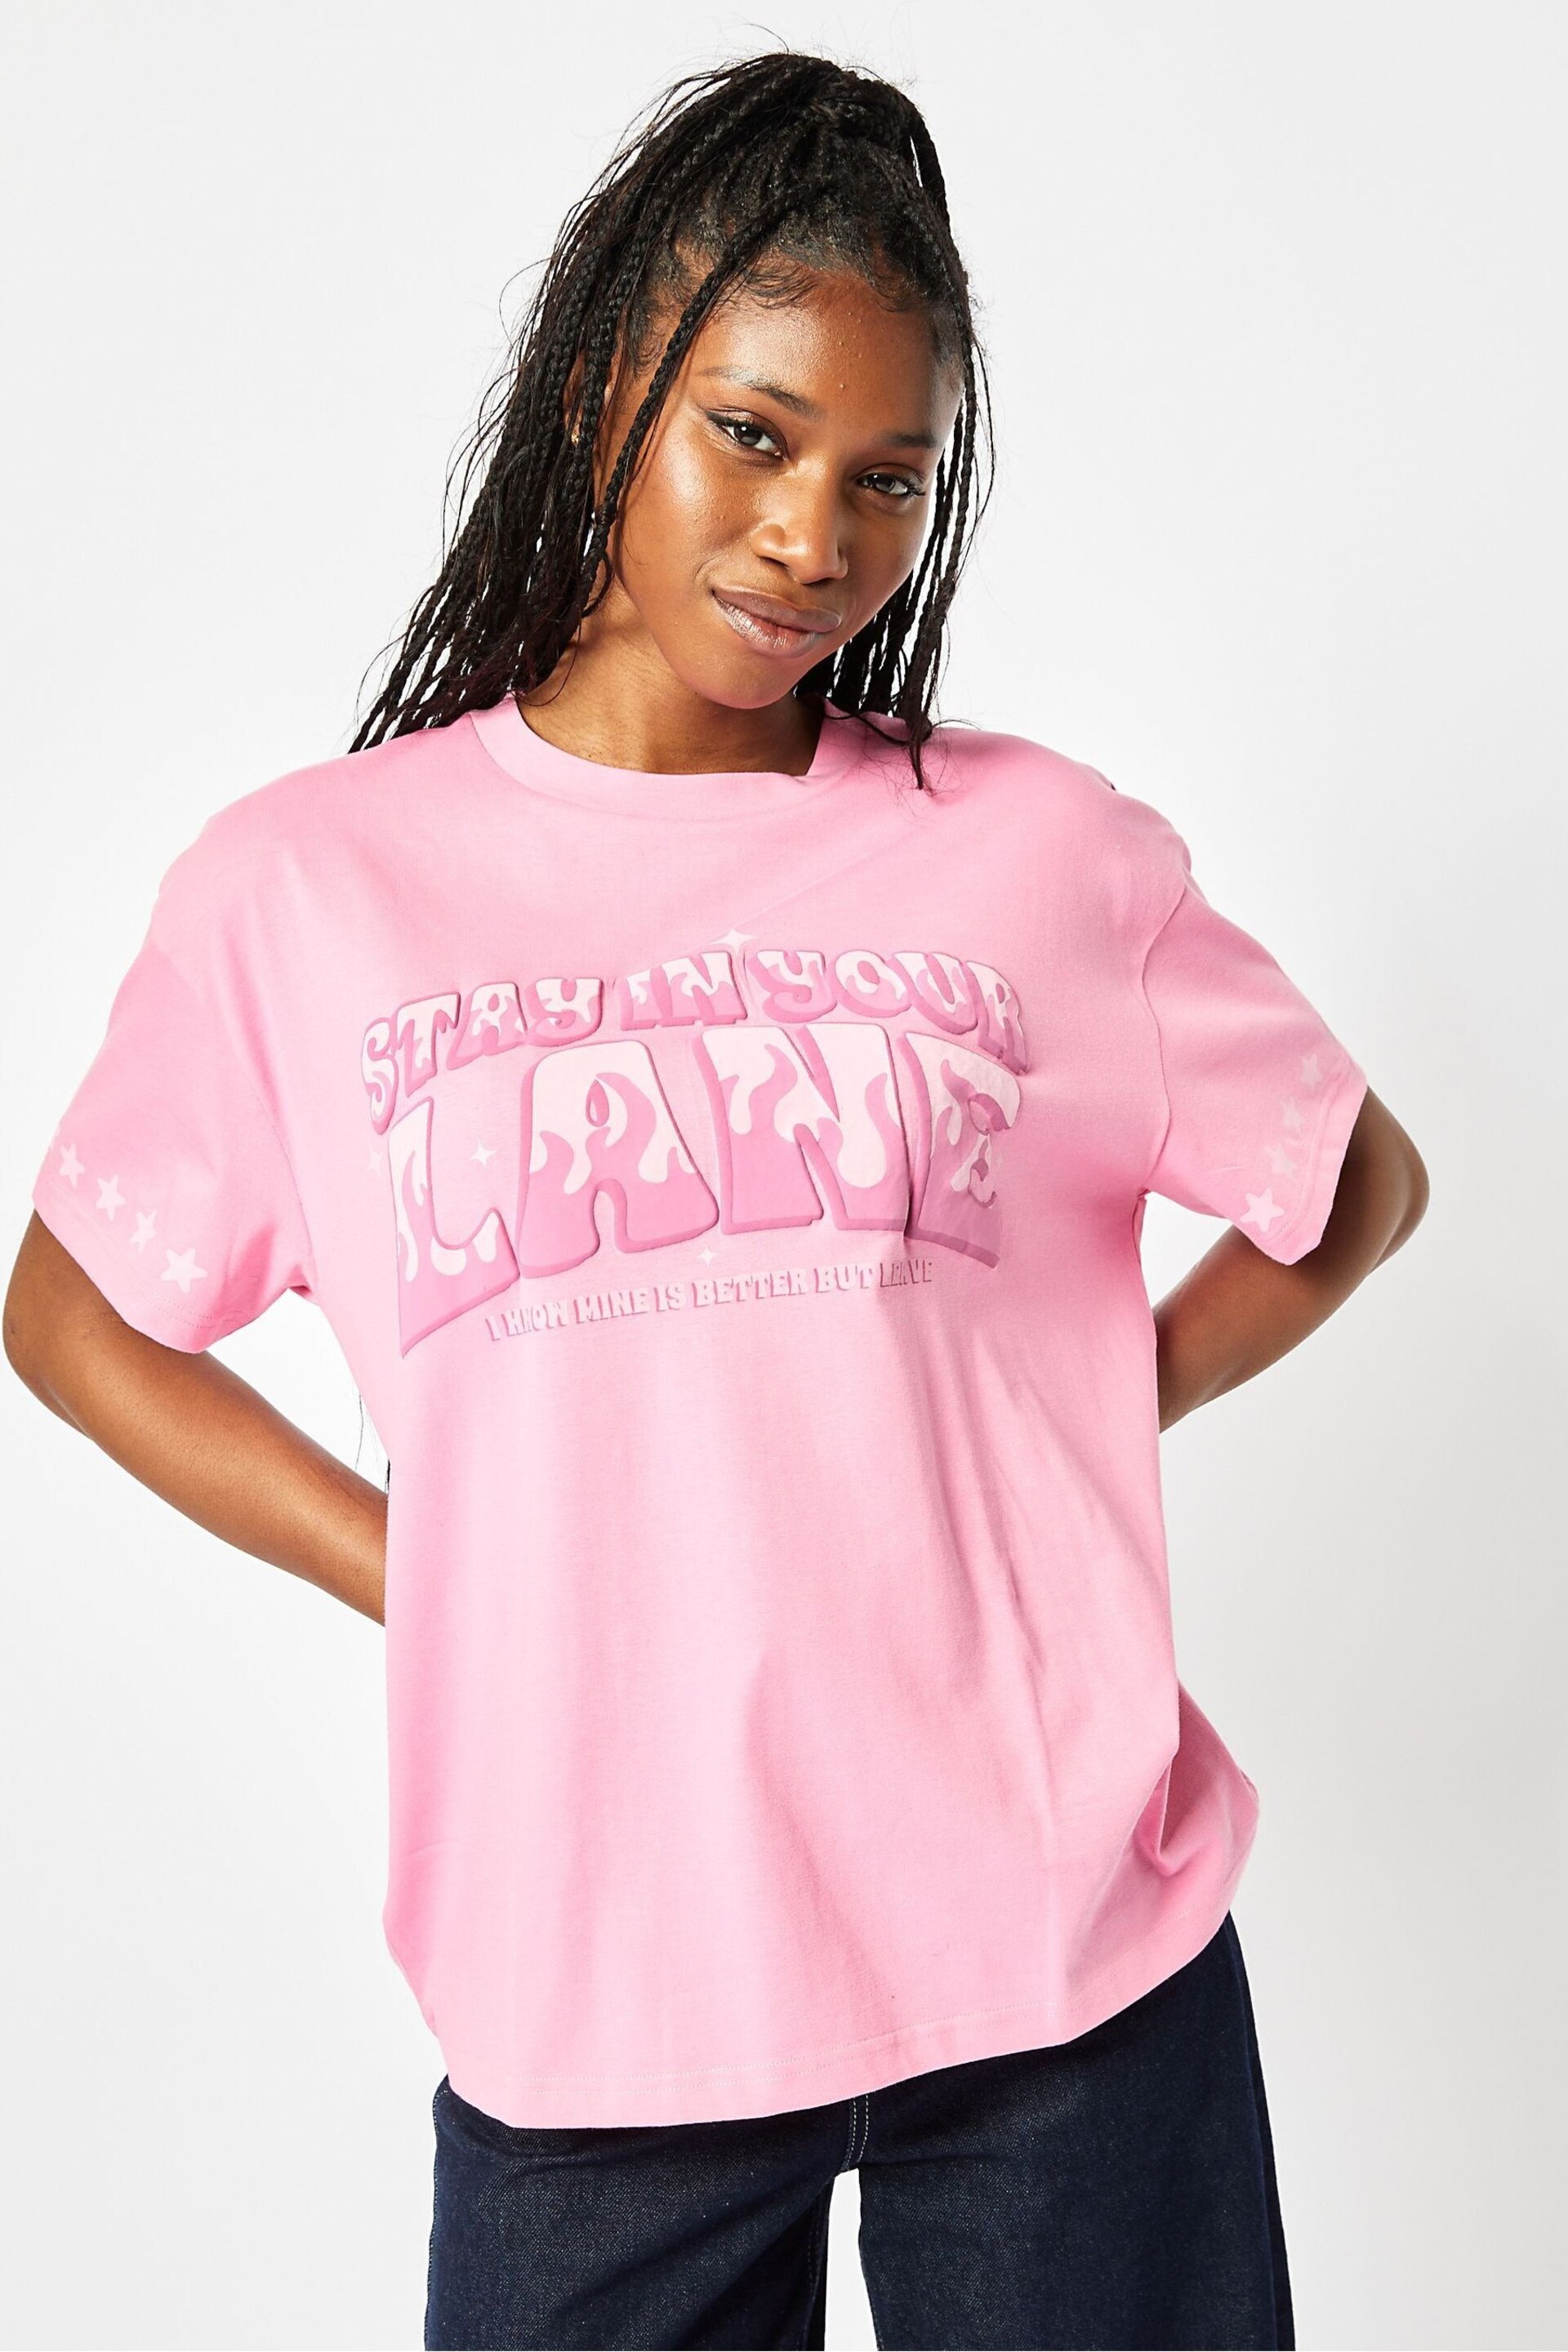 Skinnydip Oversized Pink Stay In Your Lane T-Shirt - Image 1 of 5